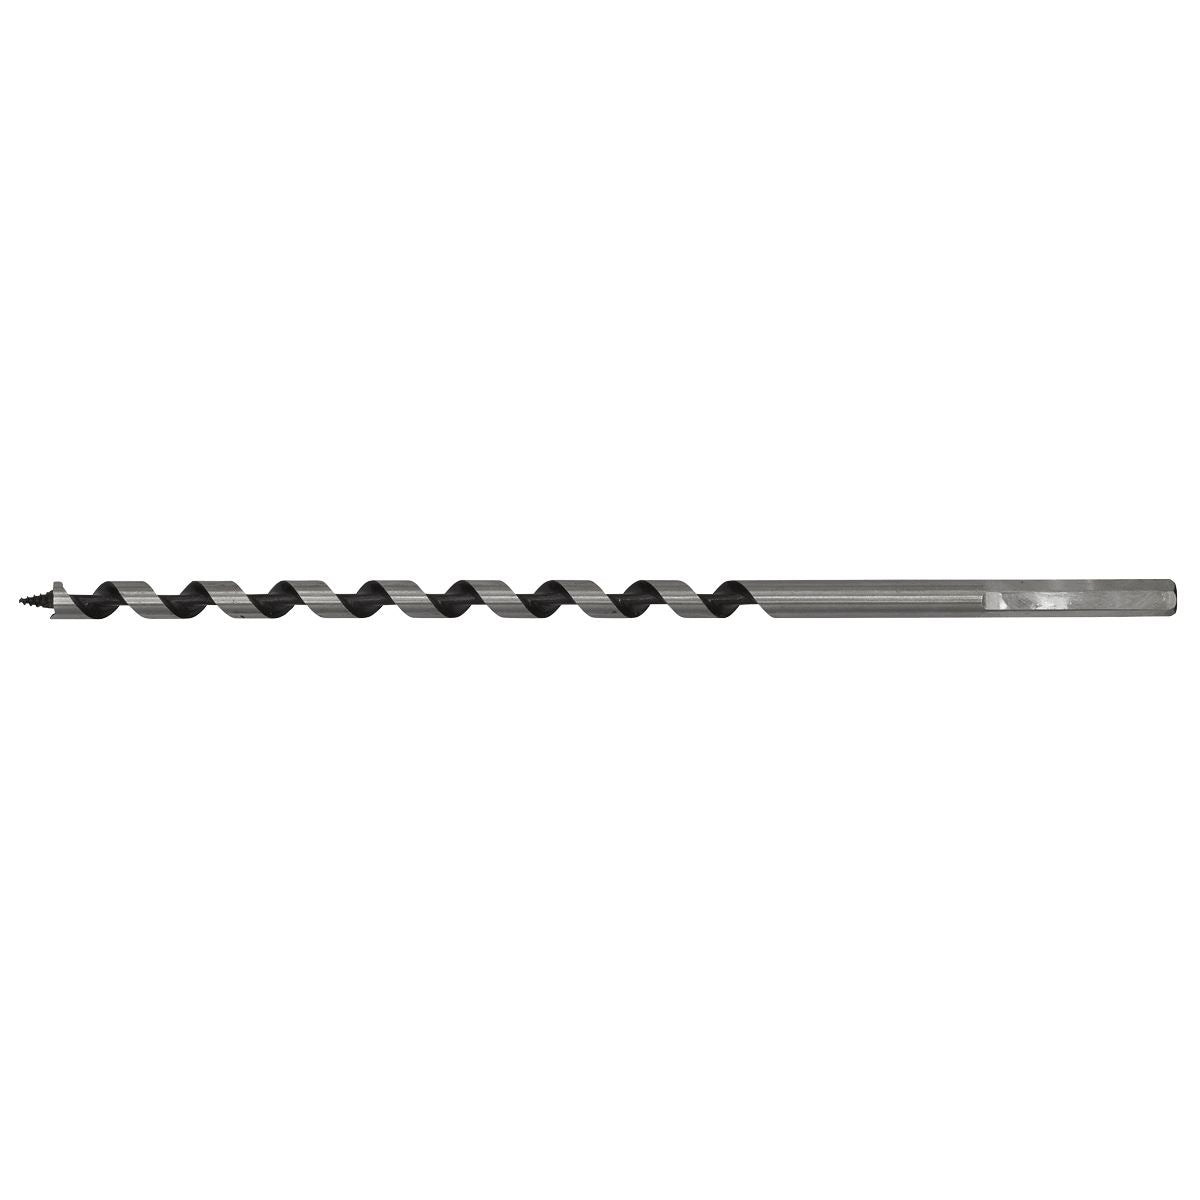 Worksafe by Sealey Auger Wood Drill Bit 8mm x 235mm